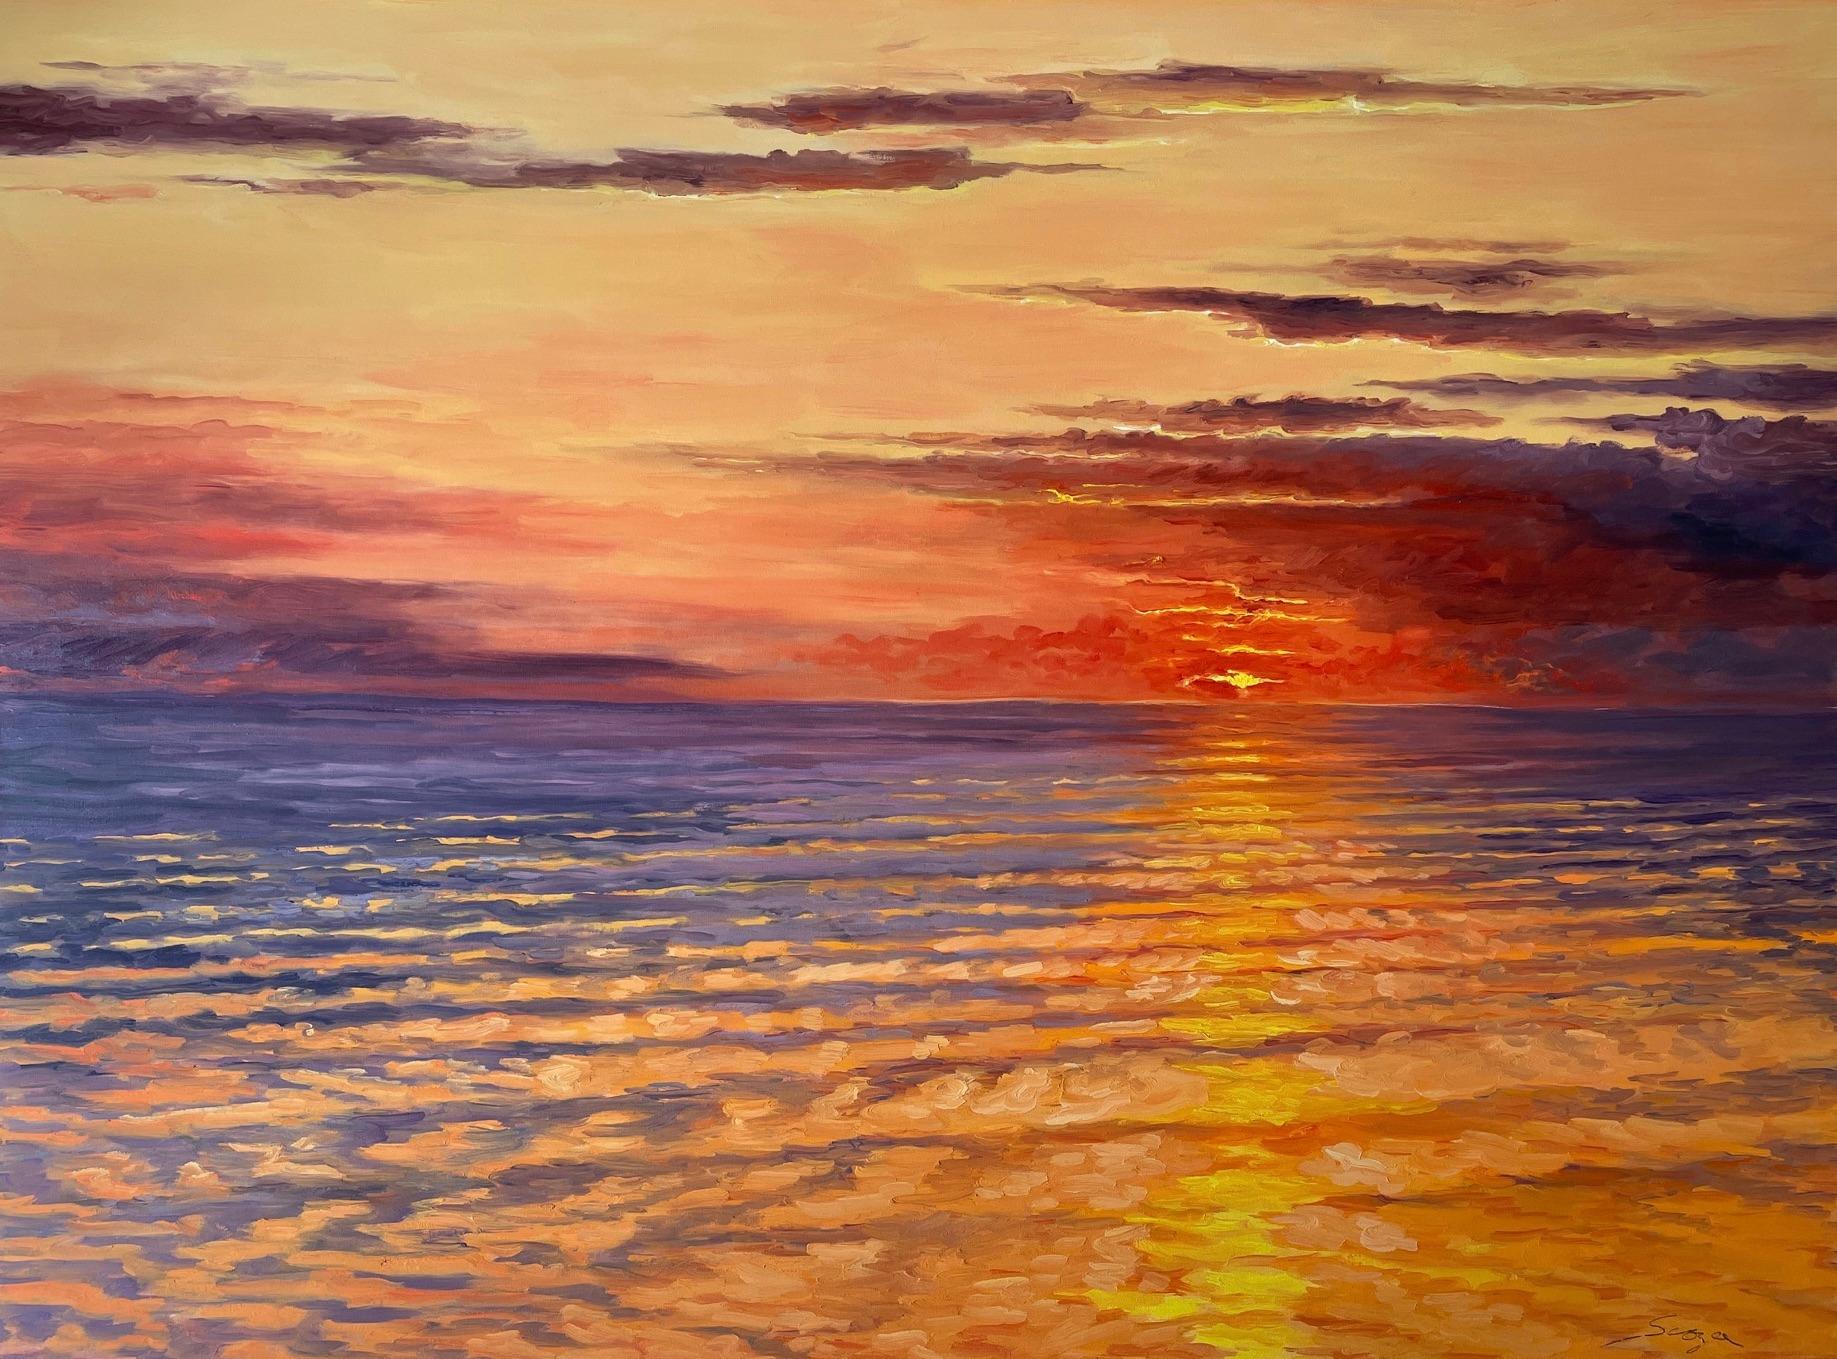 Dusk as the setting sun turns ocean and sky on fire. Title - Sunset  - Painting by Carl Scorza